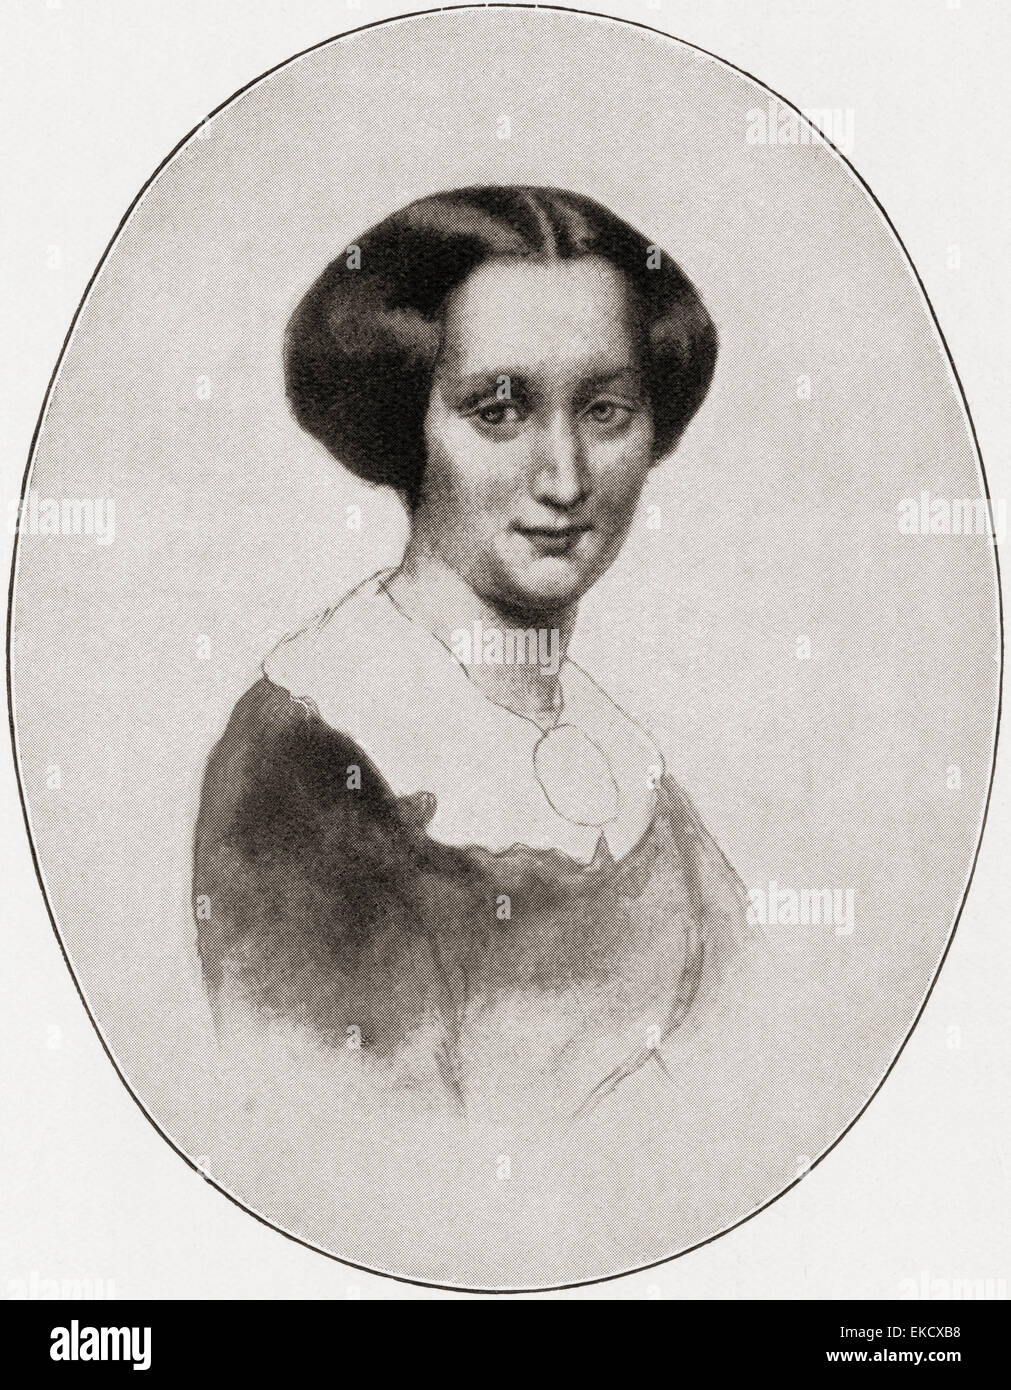 Mathilde Wesendonck,  1828 – 1902.  German poet and author. Best known as the friend and possible paramour of Richard Wagner.  After the drawing by Kietz. Stock Photo